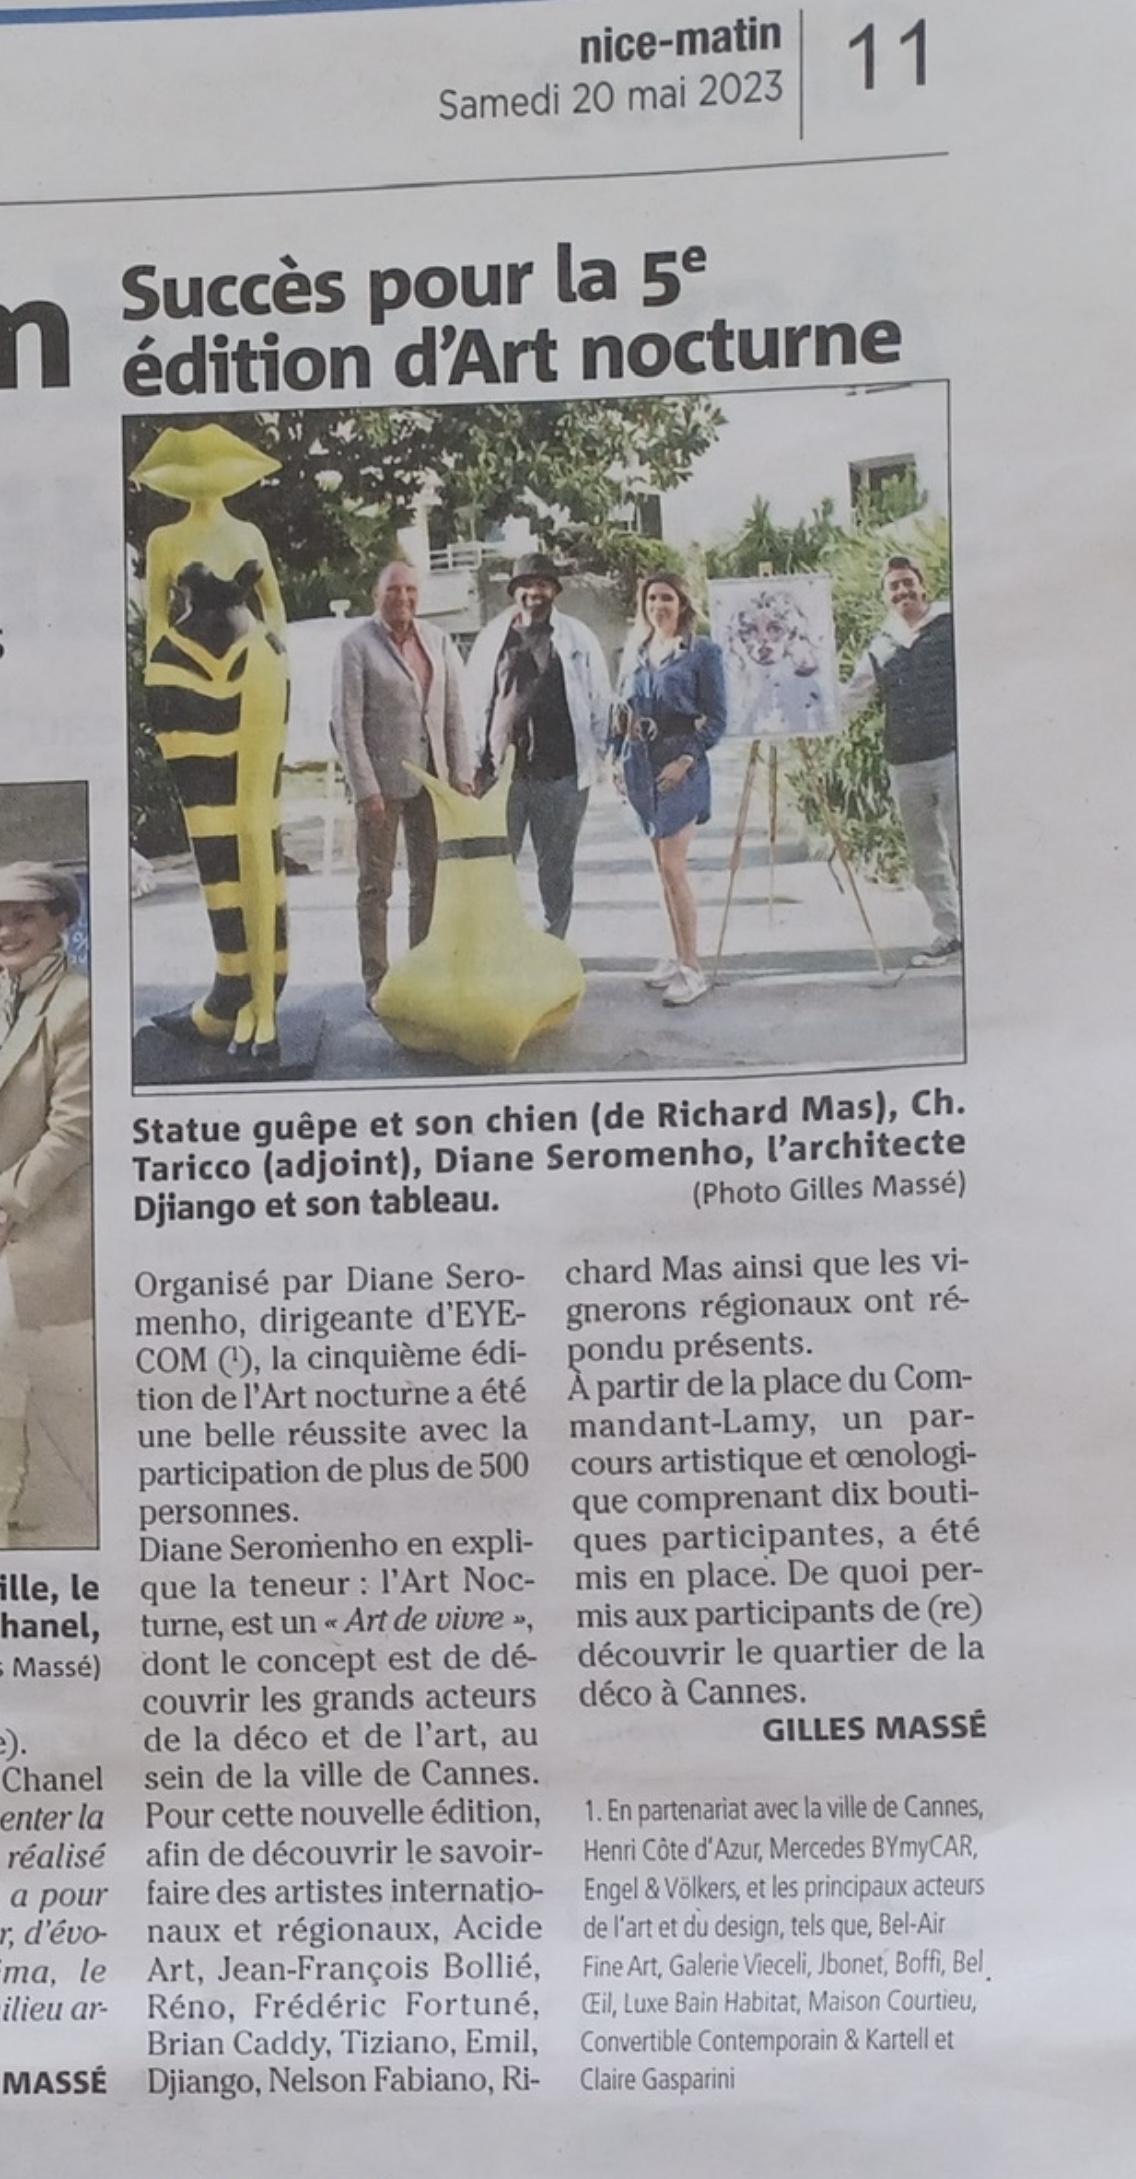 ARTICLE NICE MATIN – LART NOCTURNE 5